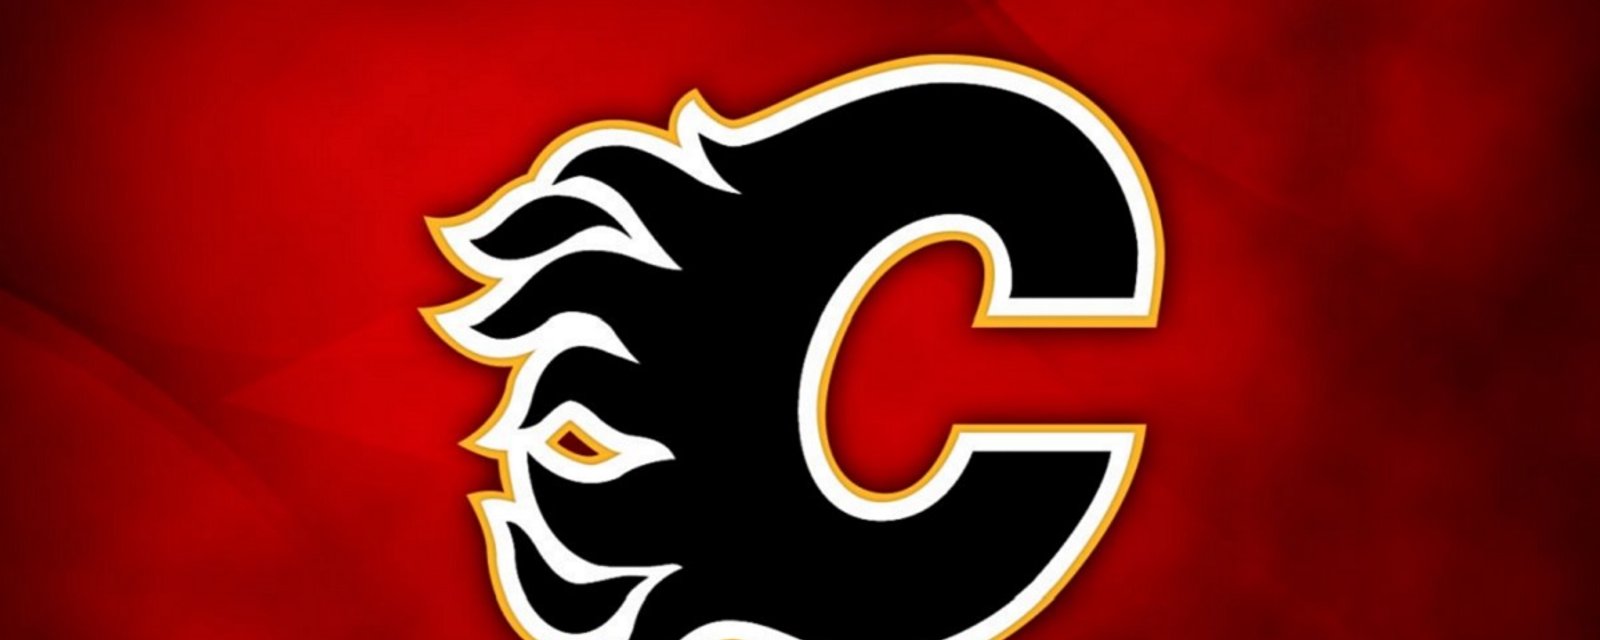 Opinion: The Calgary Flames need to drastically reverse course to avoid disaster.